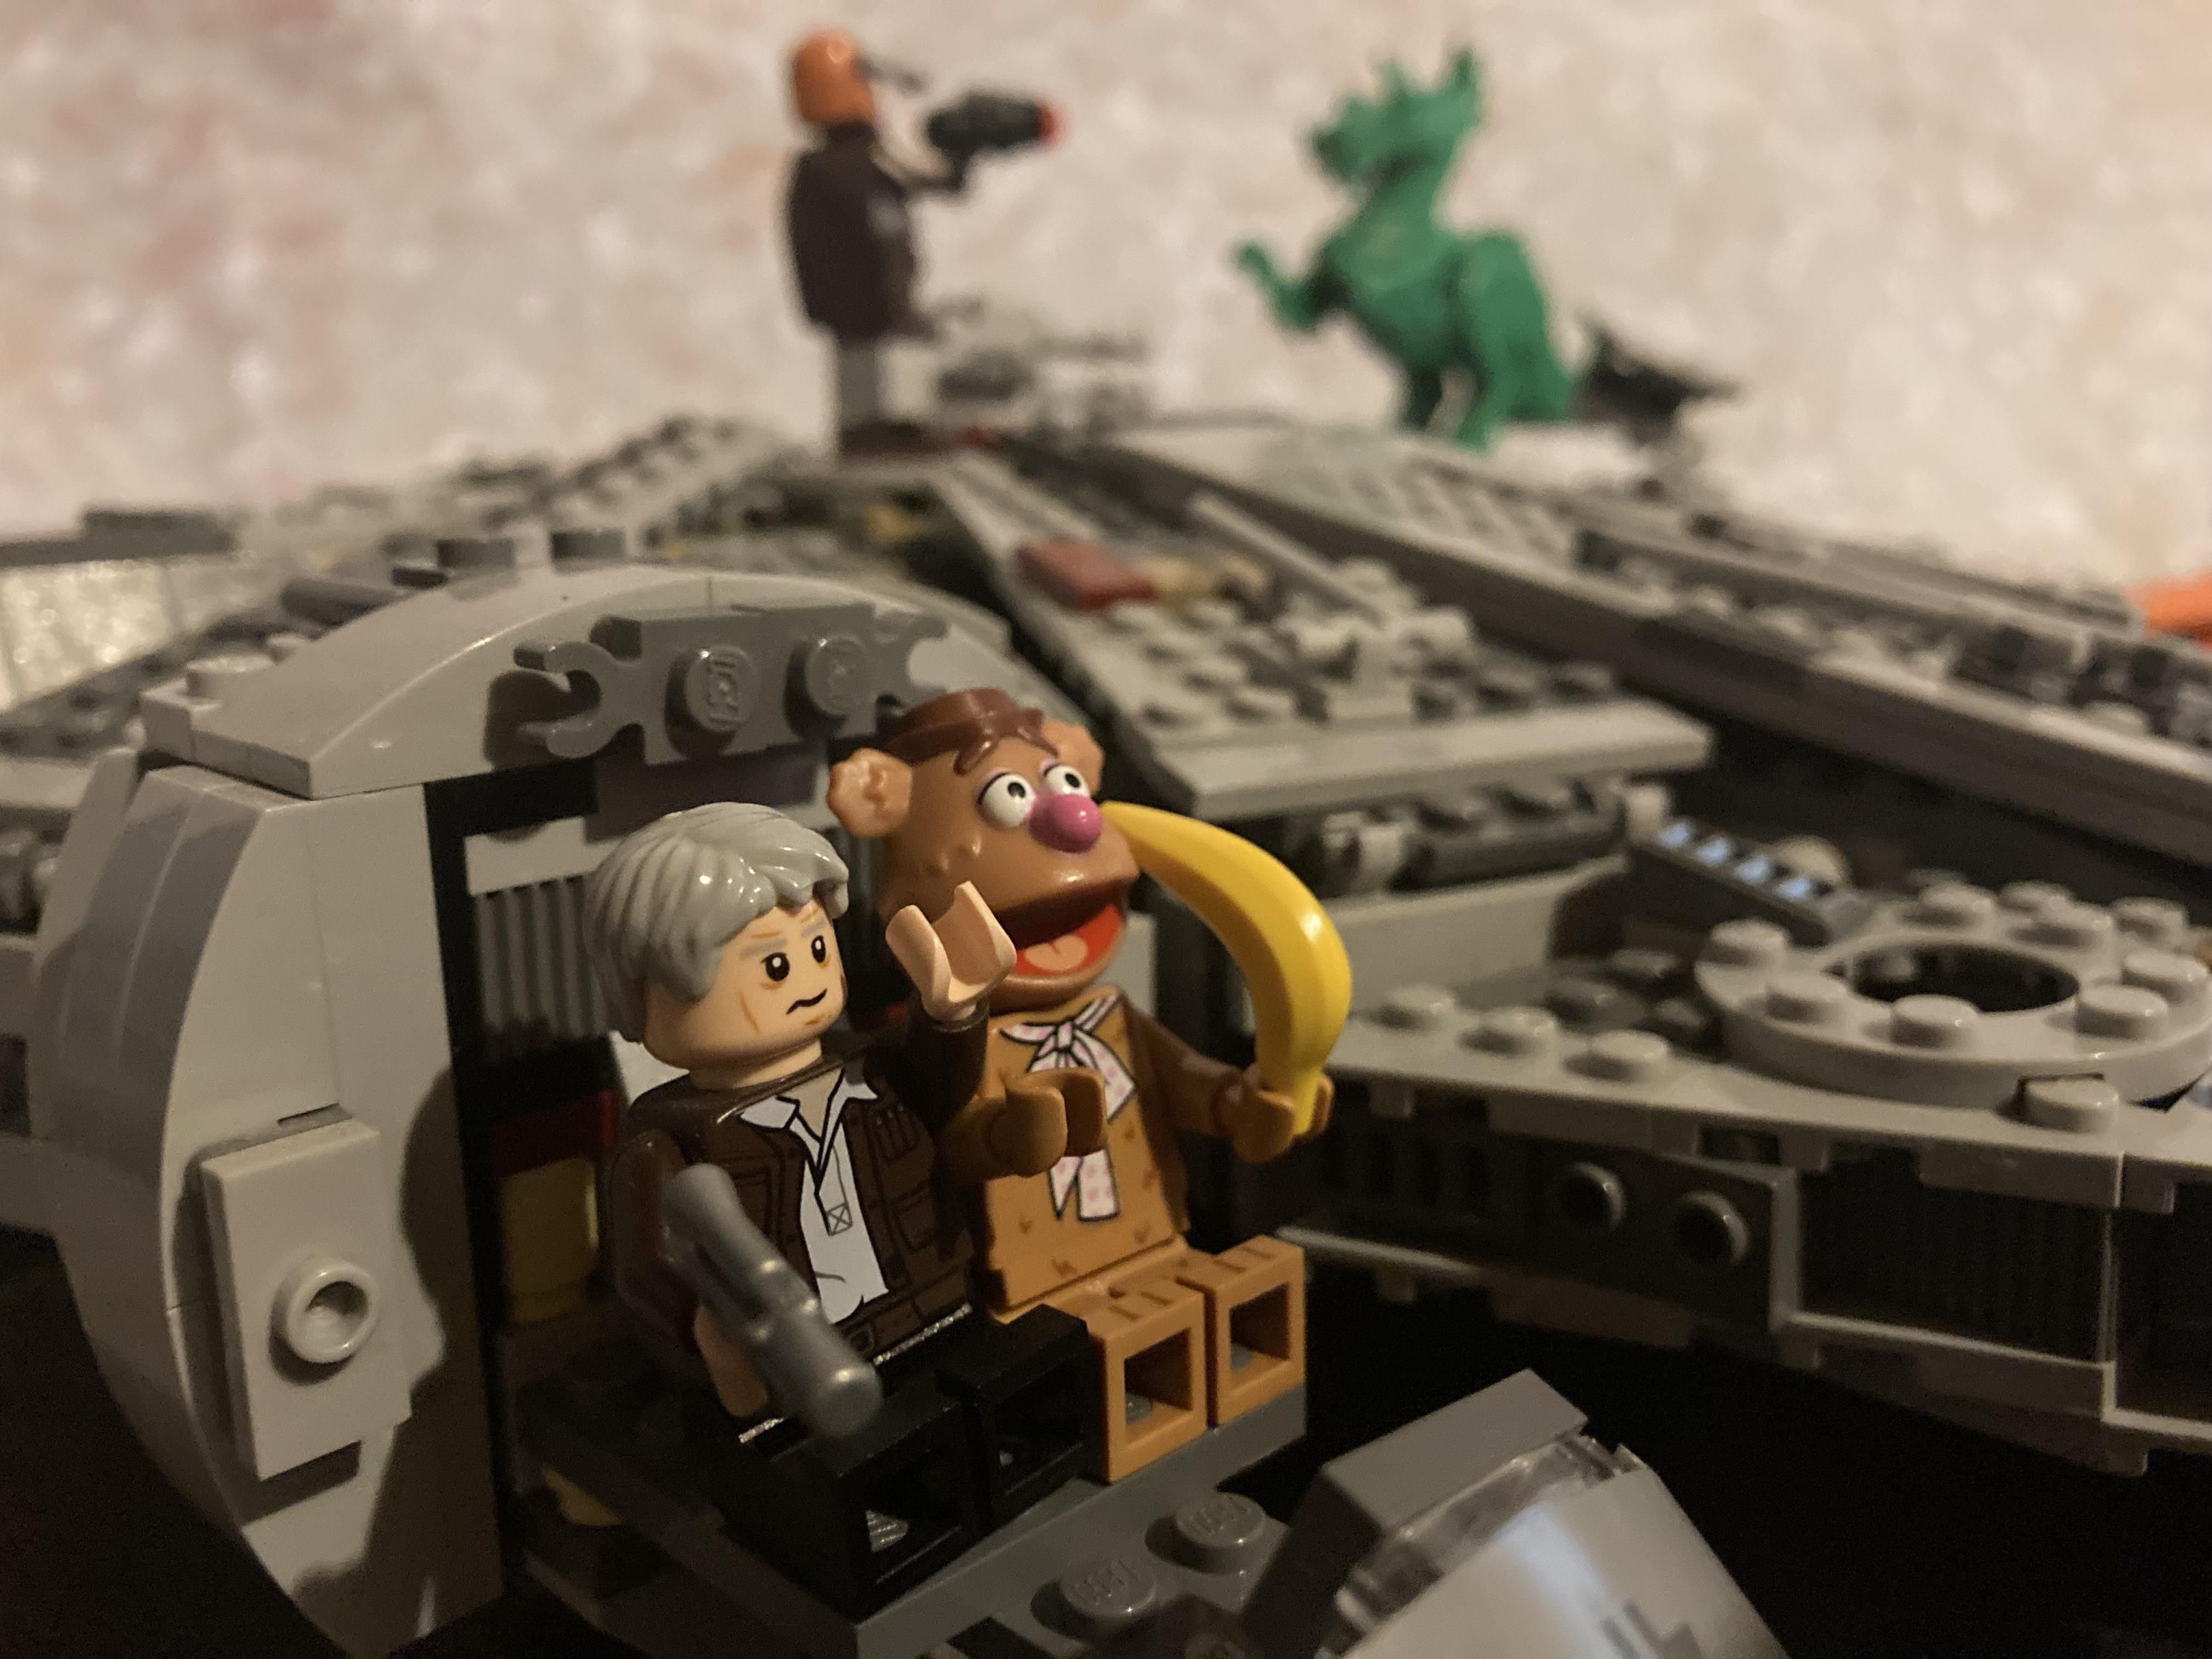 Finally bought the last mini-fig needed for my Millennium falcon set.